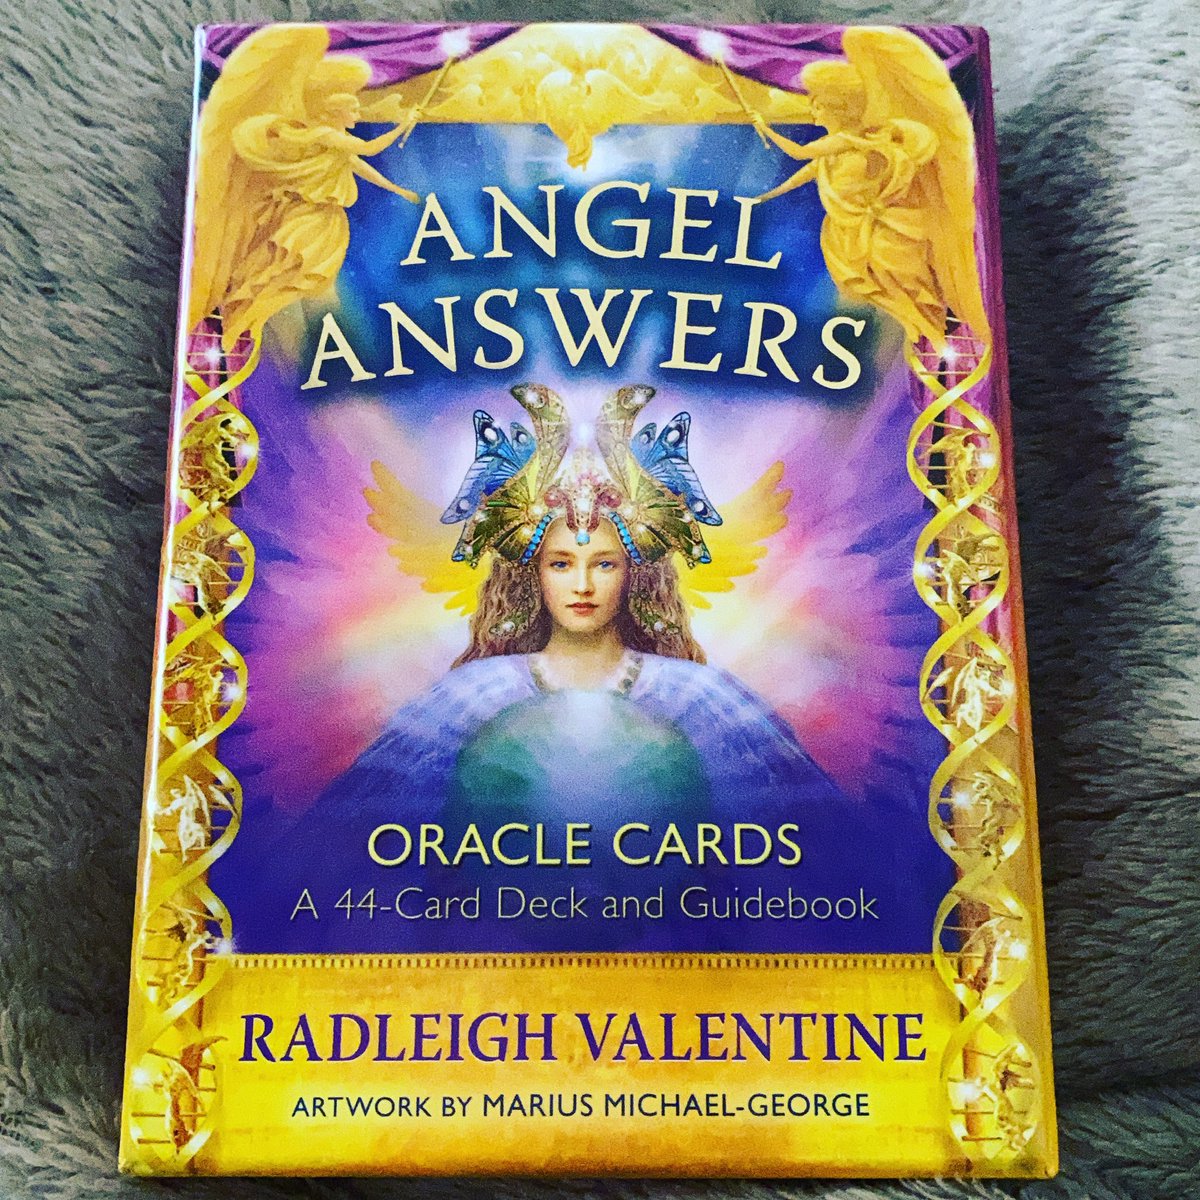 Hey guys let’s have some fun!! Comment a yes/no question below and I will answer from my new angel answers oracle deck! It can be any close ended question!